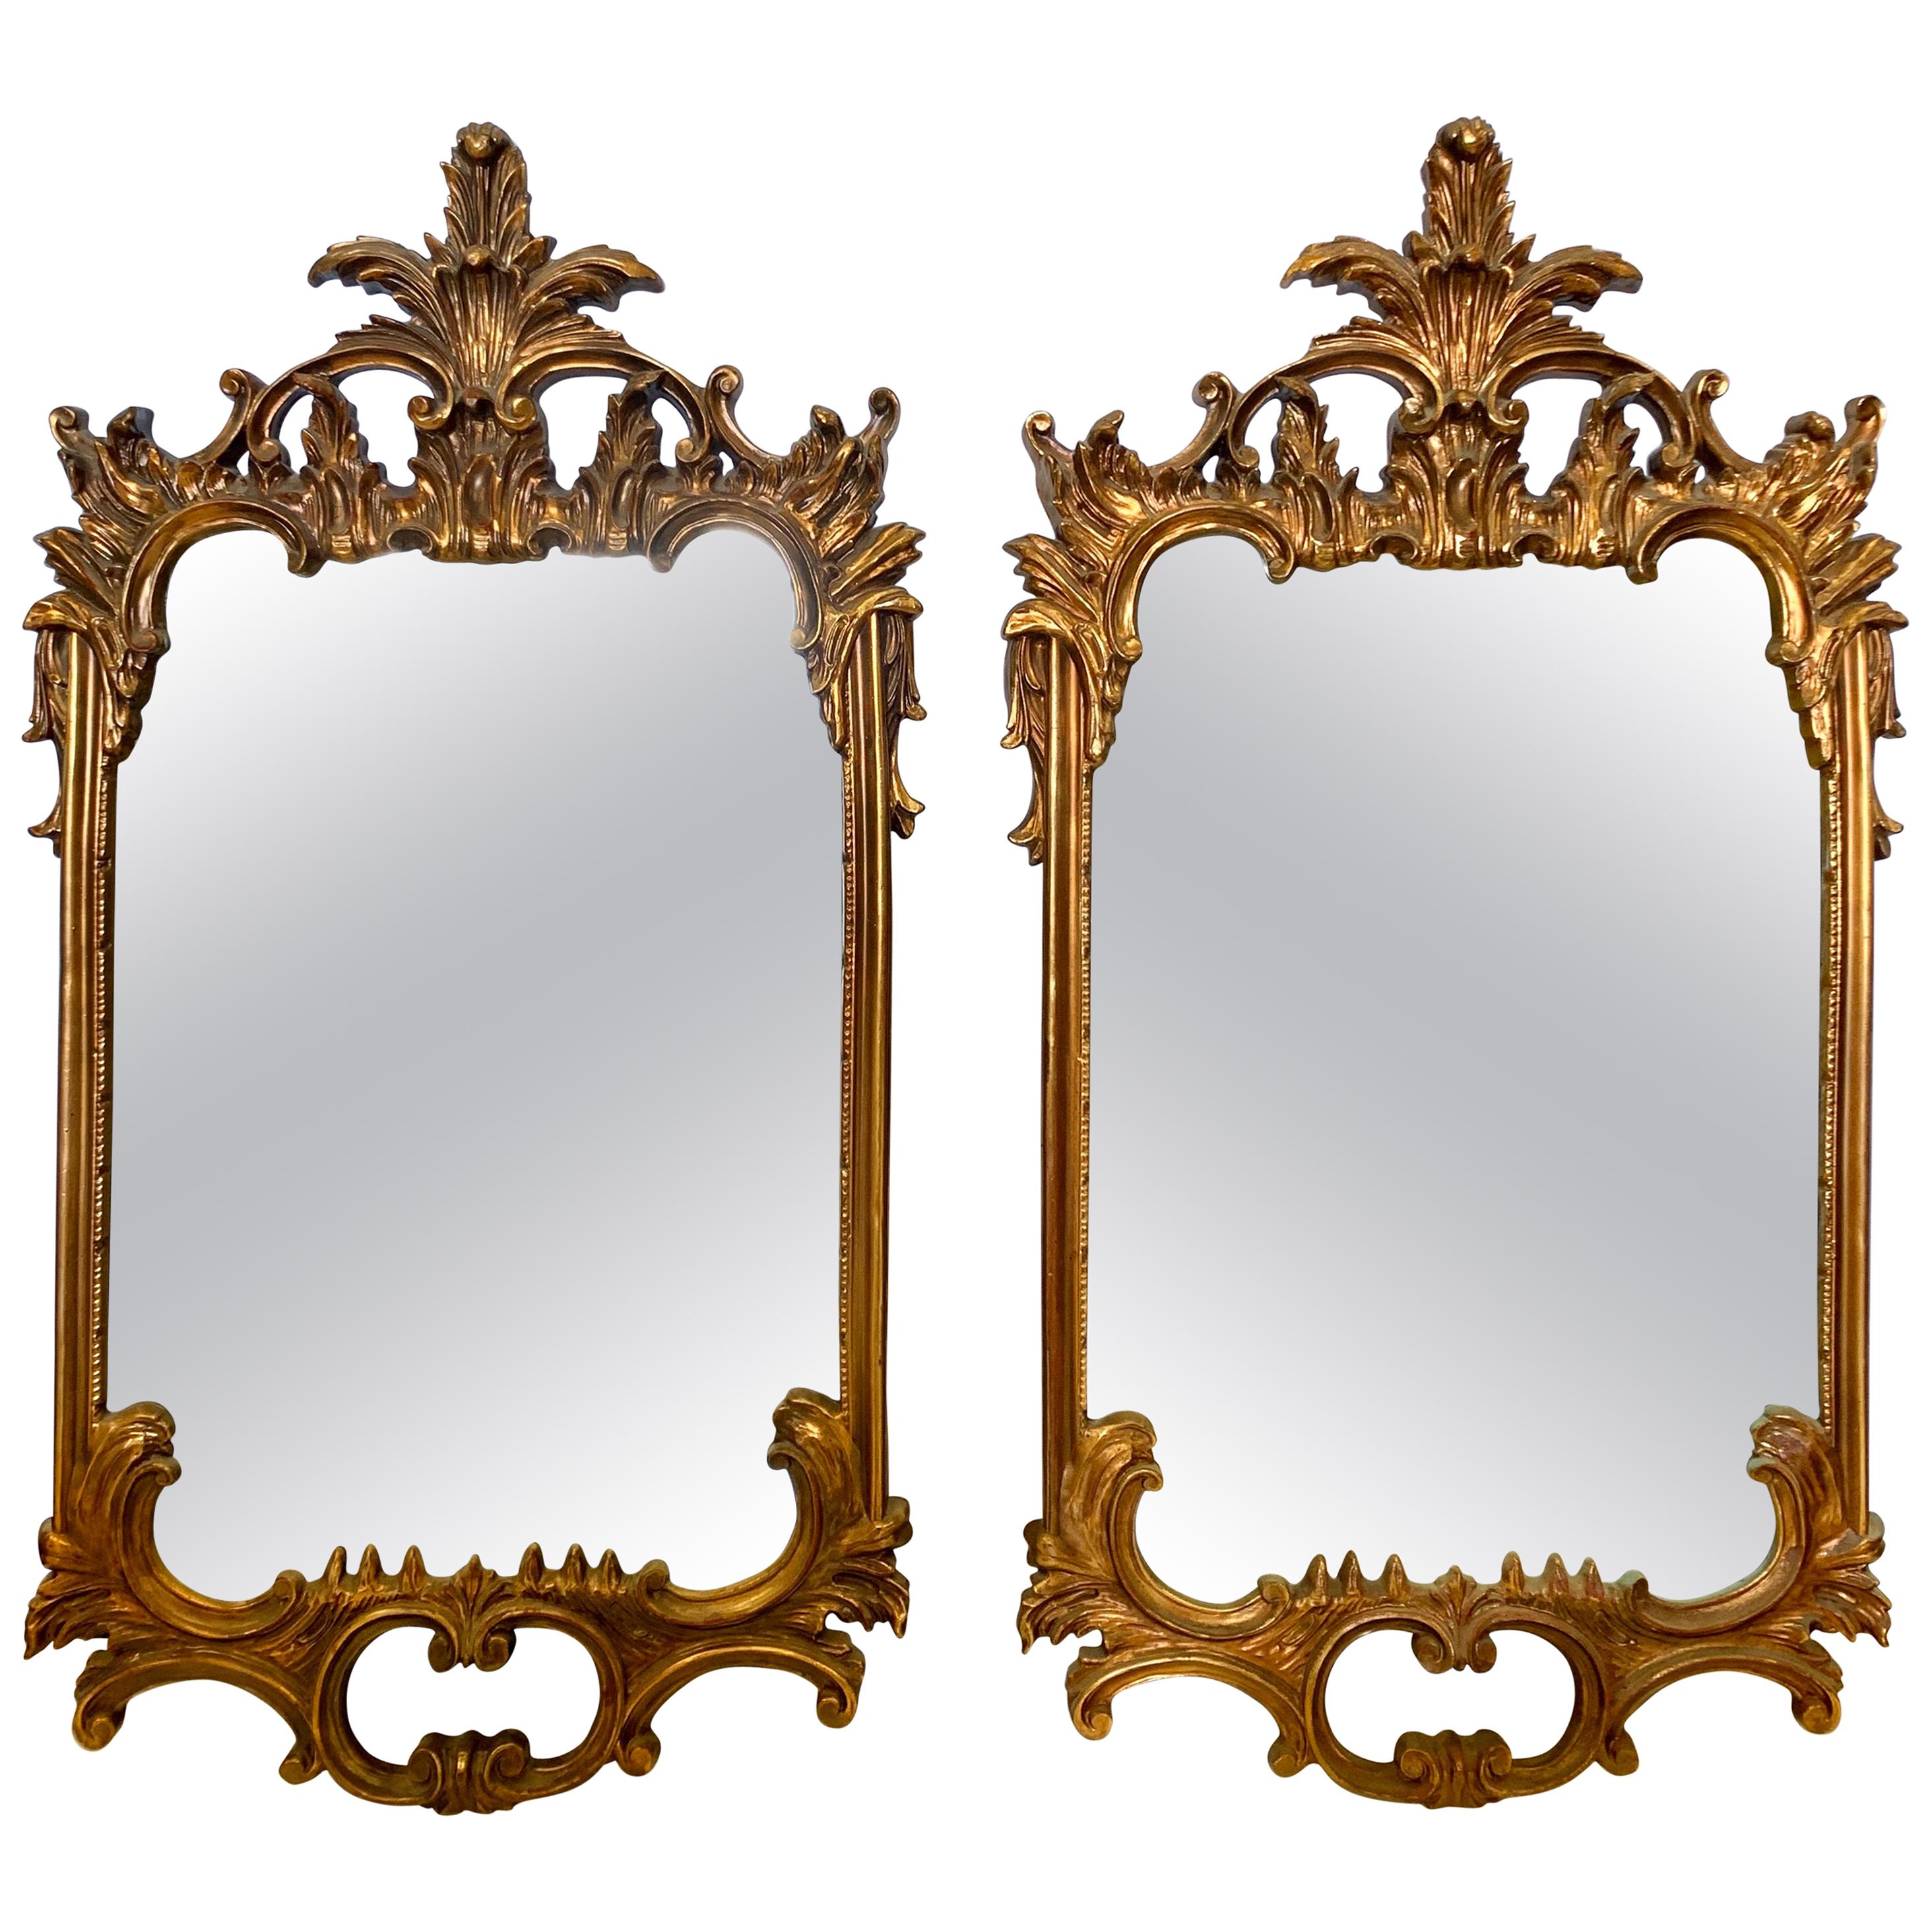 Pair of Tall Matching Carved Baroque Style Giltwood Mirrors